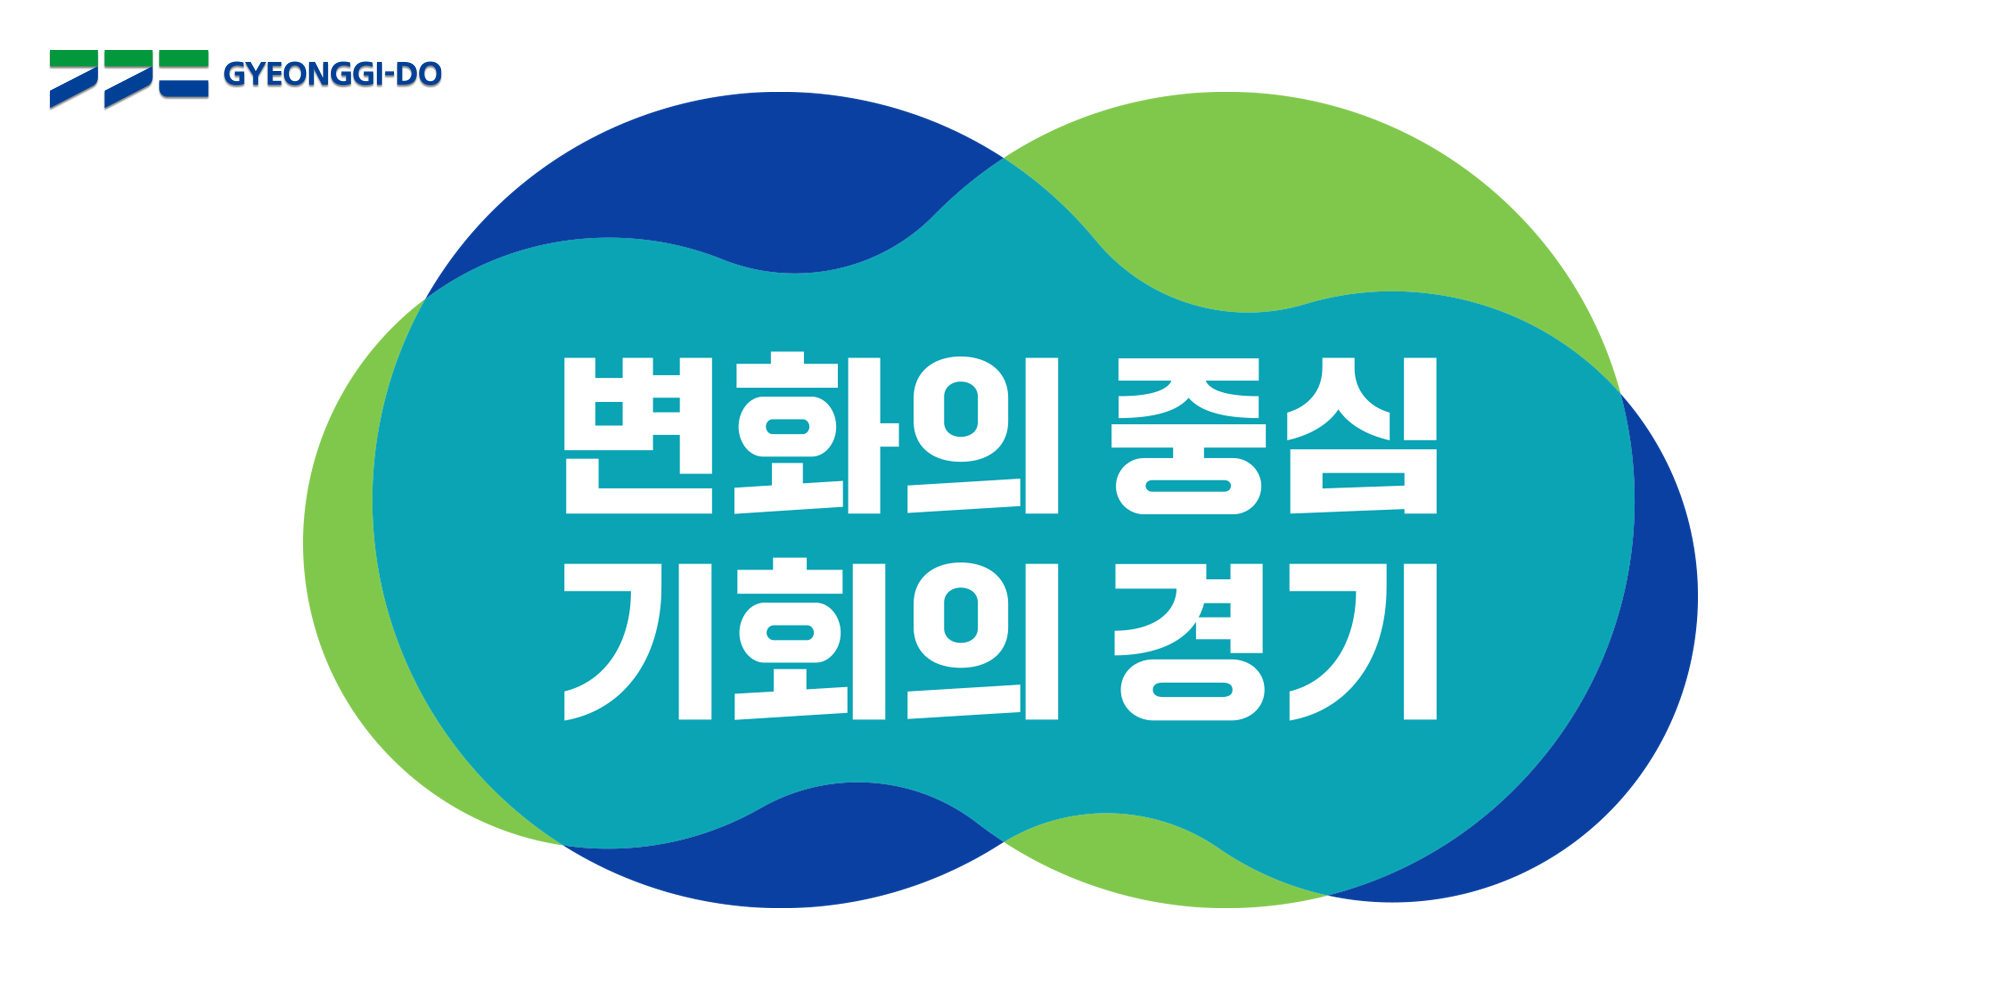 Gyeonggi Province Develops New Administrative Brand with Value Slogan